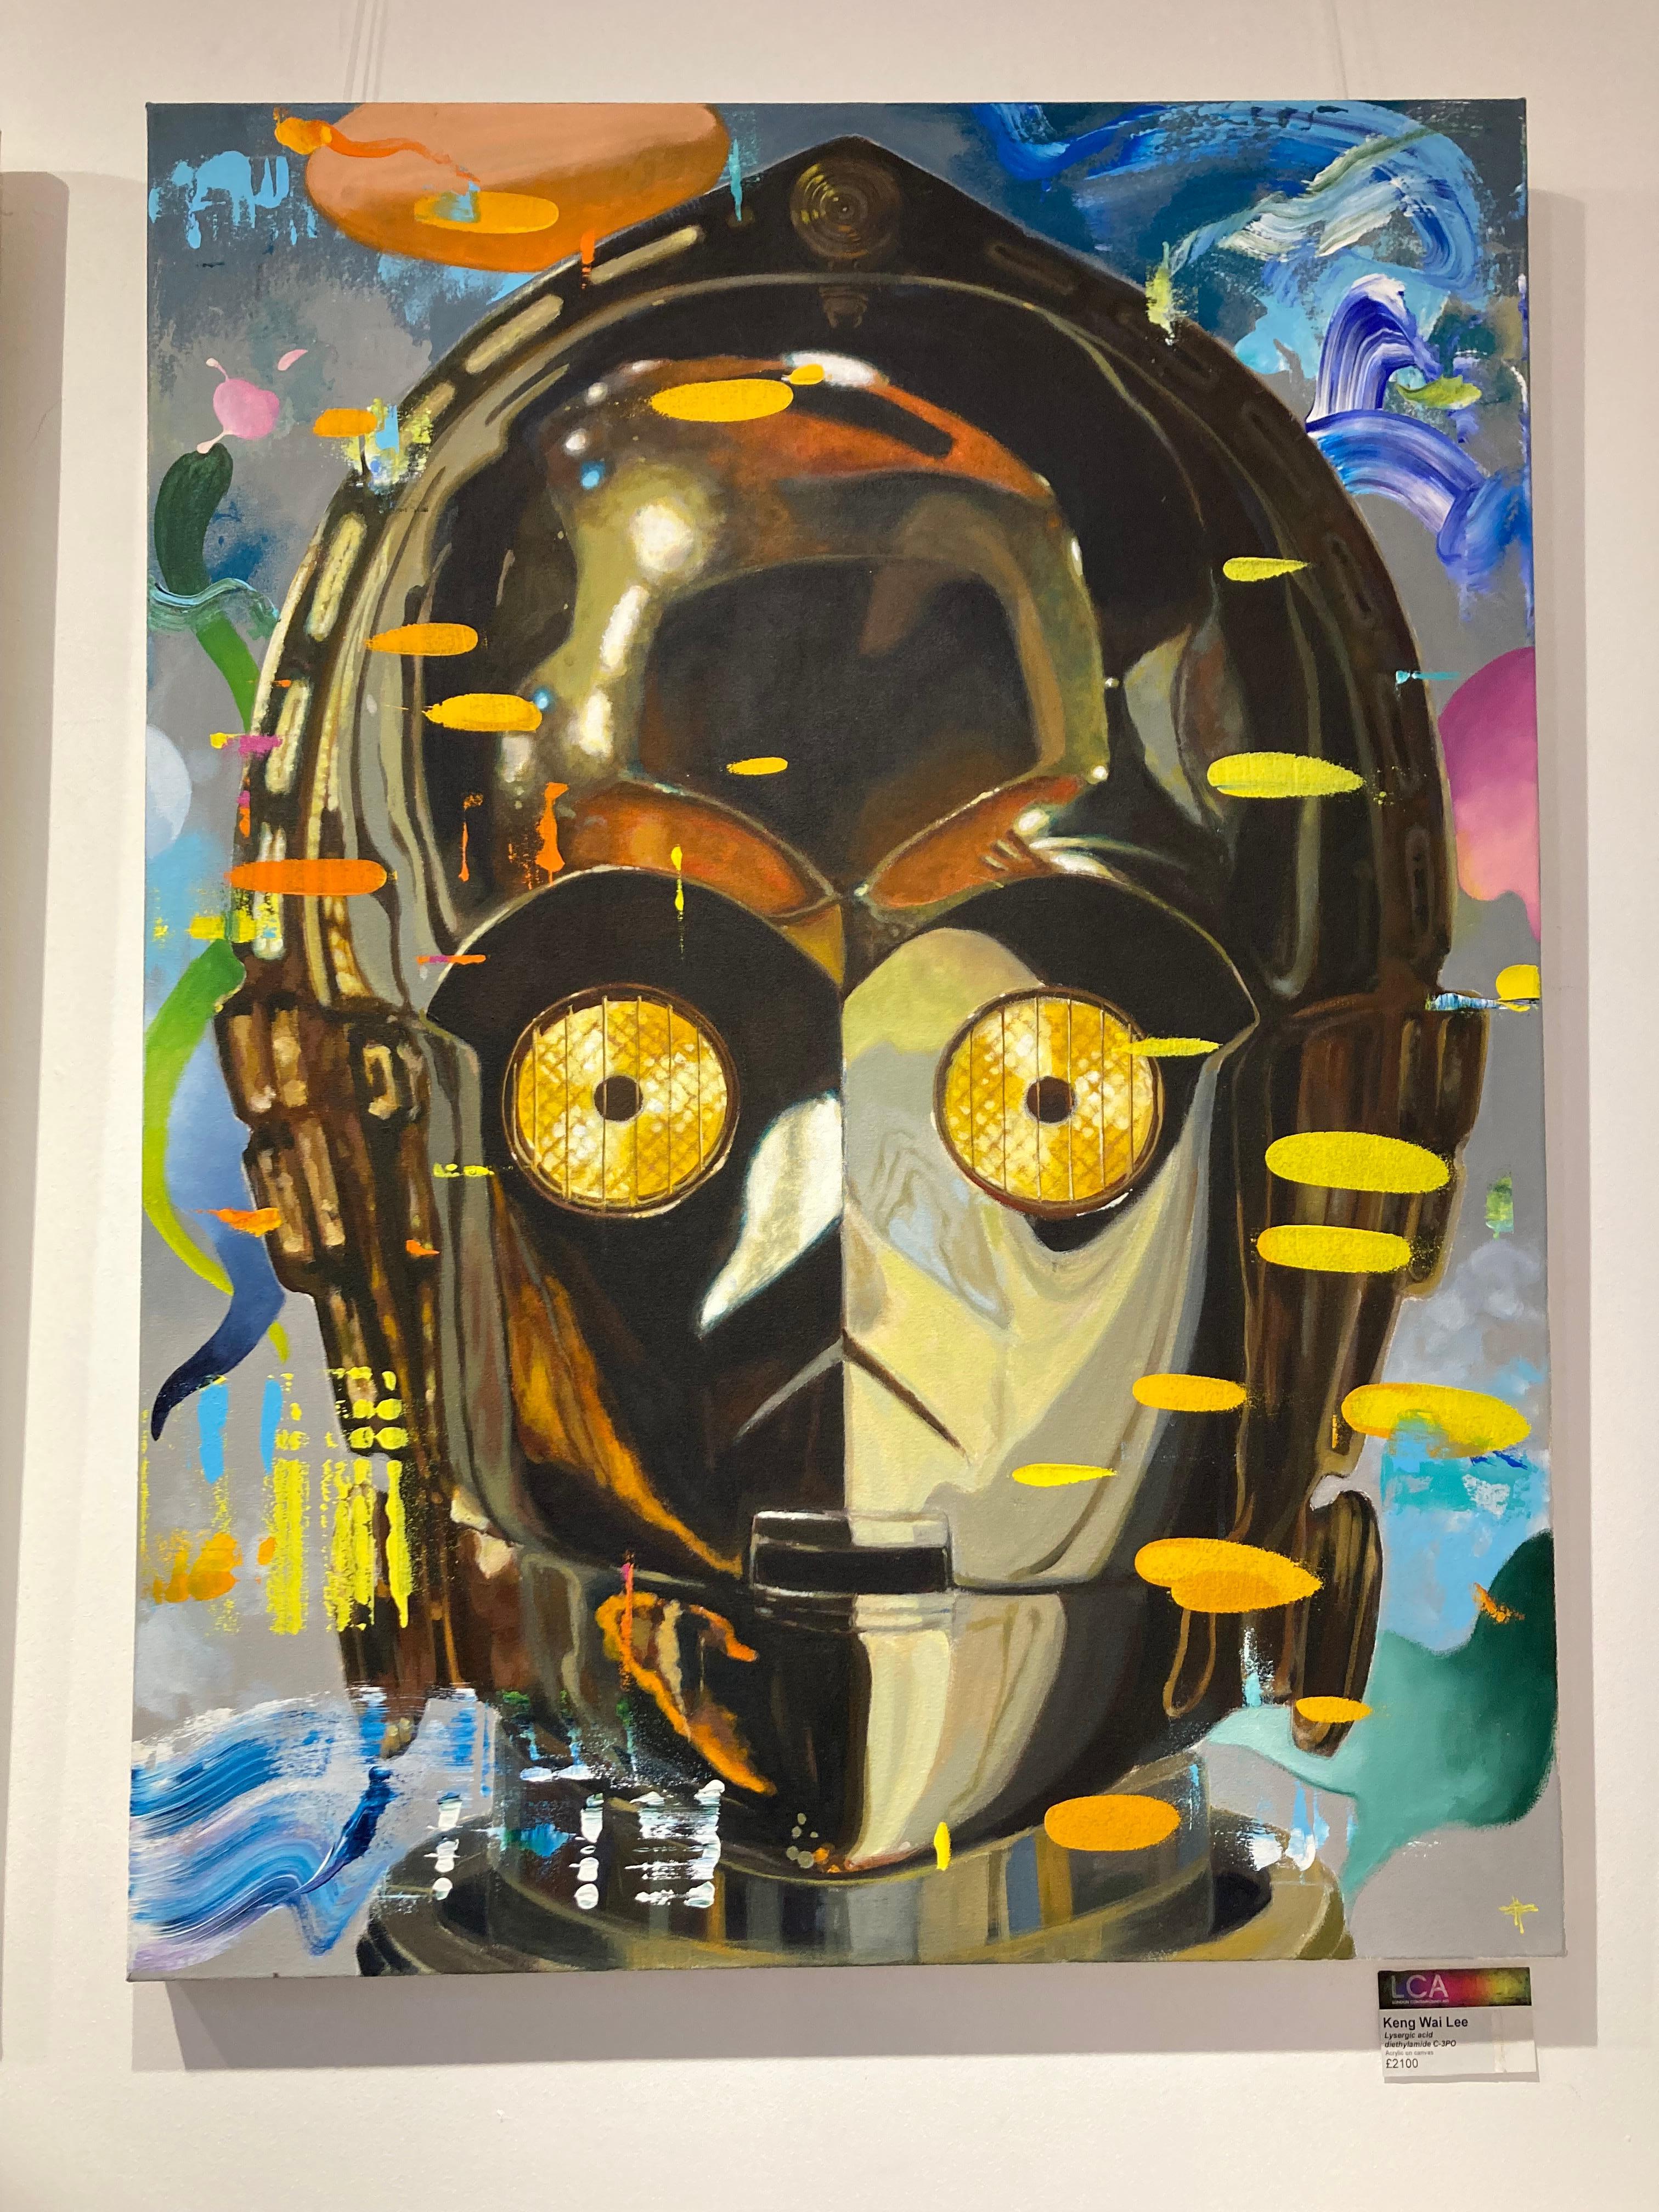 Lysergic acid diethylamide C-3PO - contemporary sci-fi Star Wars robot painting - Painting by Keng Wai Lee